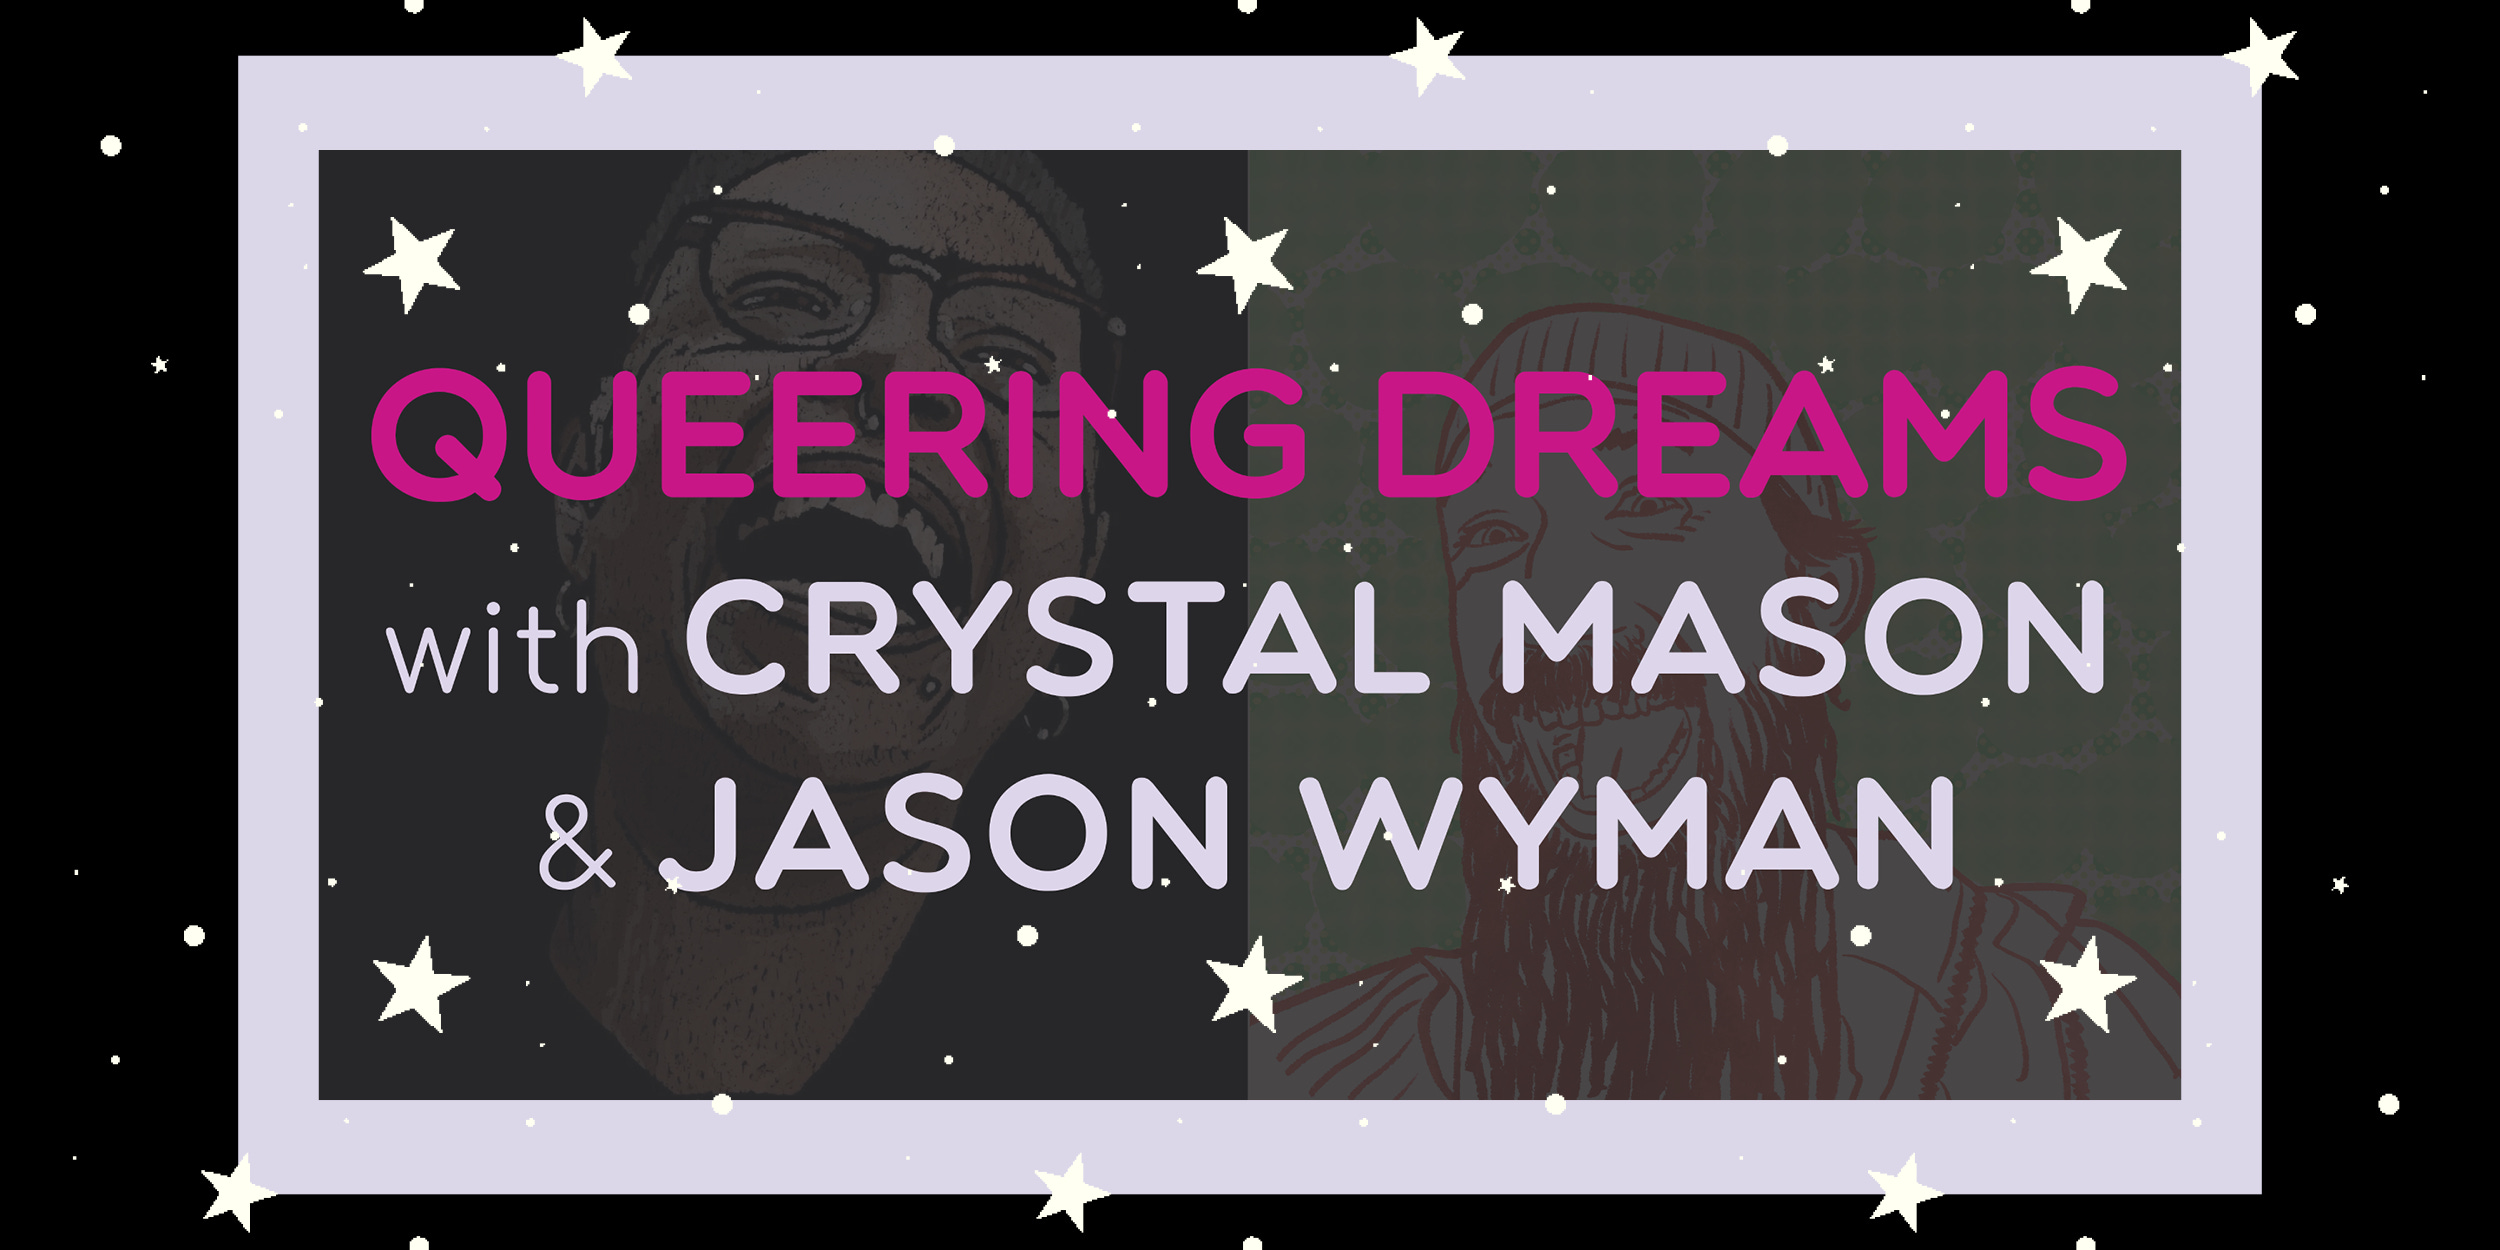 Illustrations of Crystal Mason & Jason Wyman done by Jason overlayed with white stars and "Queering Dreams with Crystal Mason & Jason Wyman". The portraits are outlined in a light lavendar, and it is all set agains a black background.